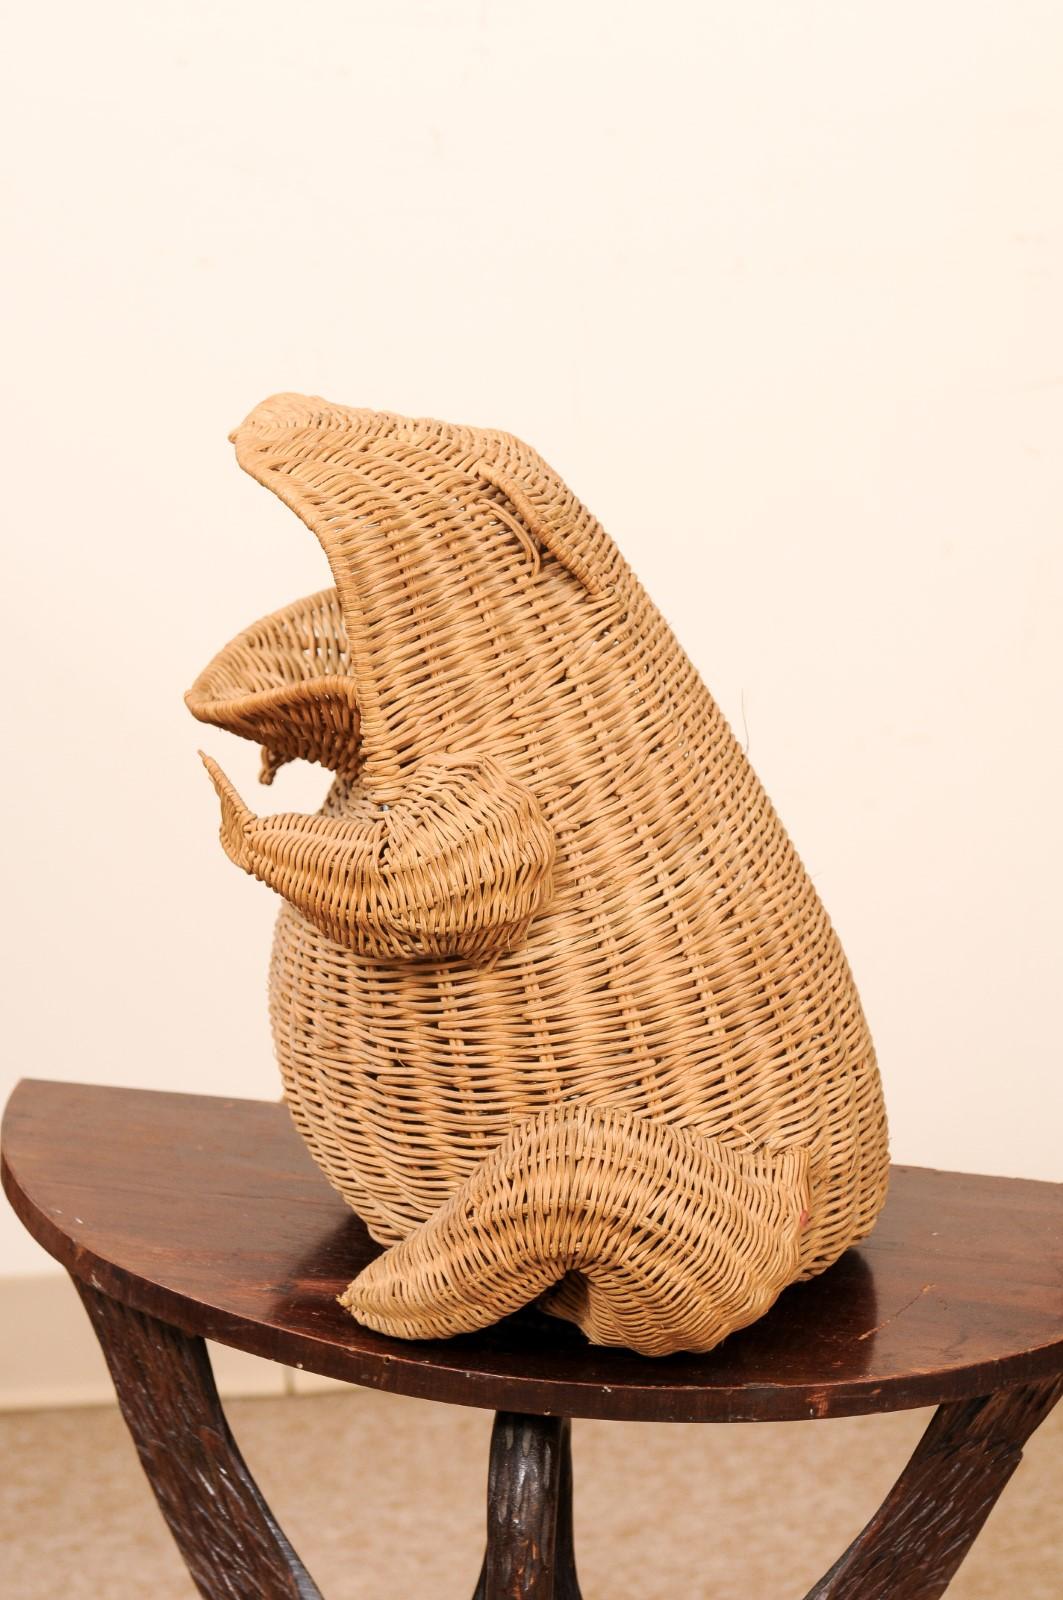 20th Century Whimsical Italian Wicker Frog Basket For Sale 4